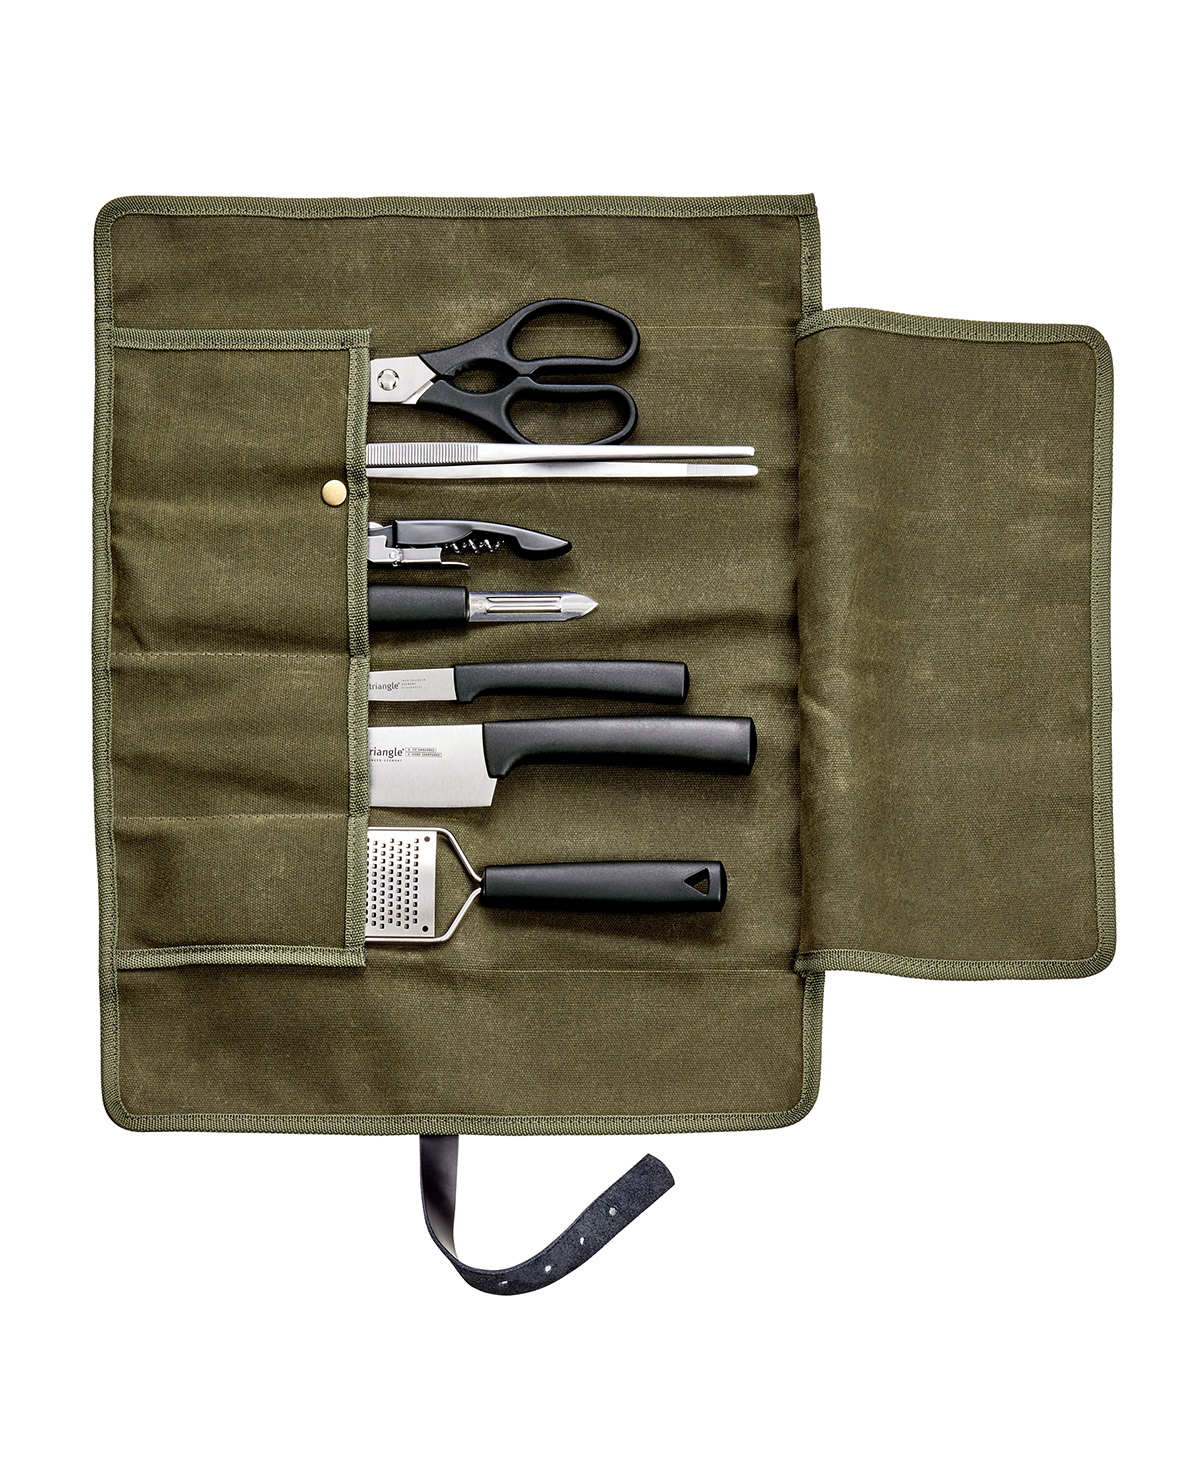 Protect triangle cooking bag made of naturally waxed cotton canvas knife bag Culinary bag travel holiday kitchen gadgets